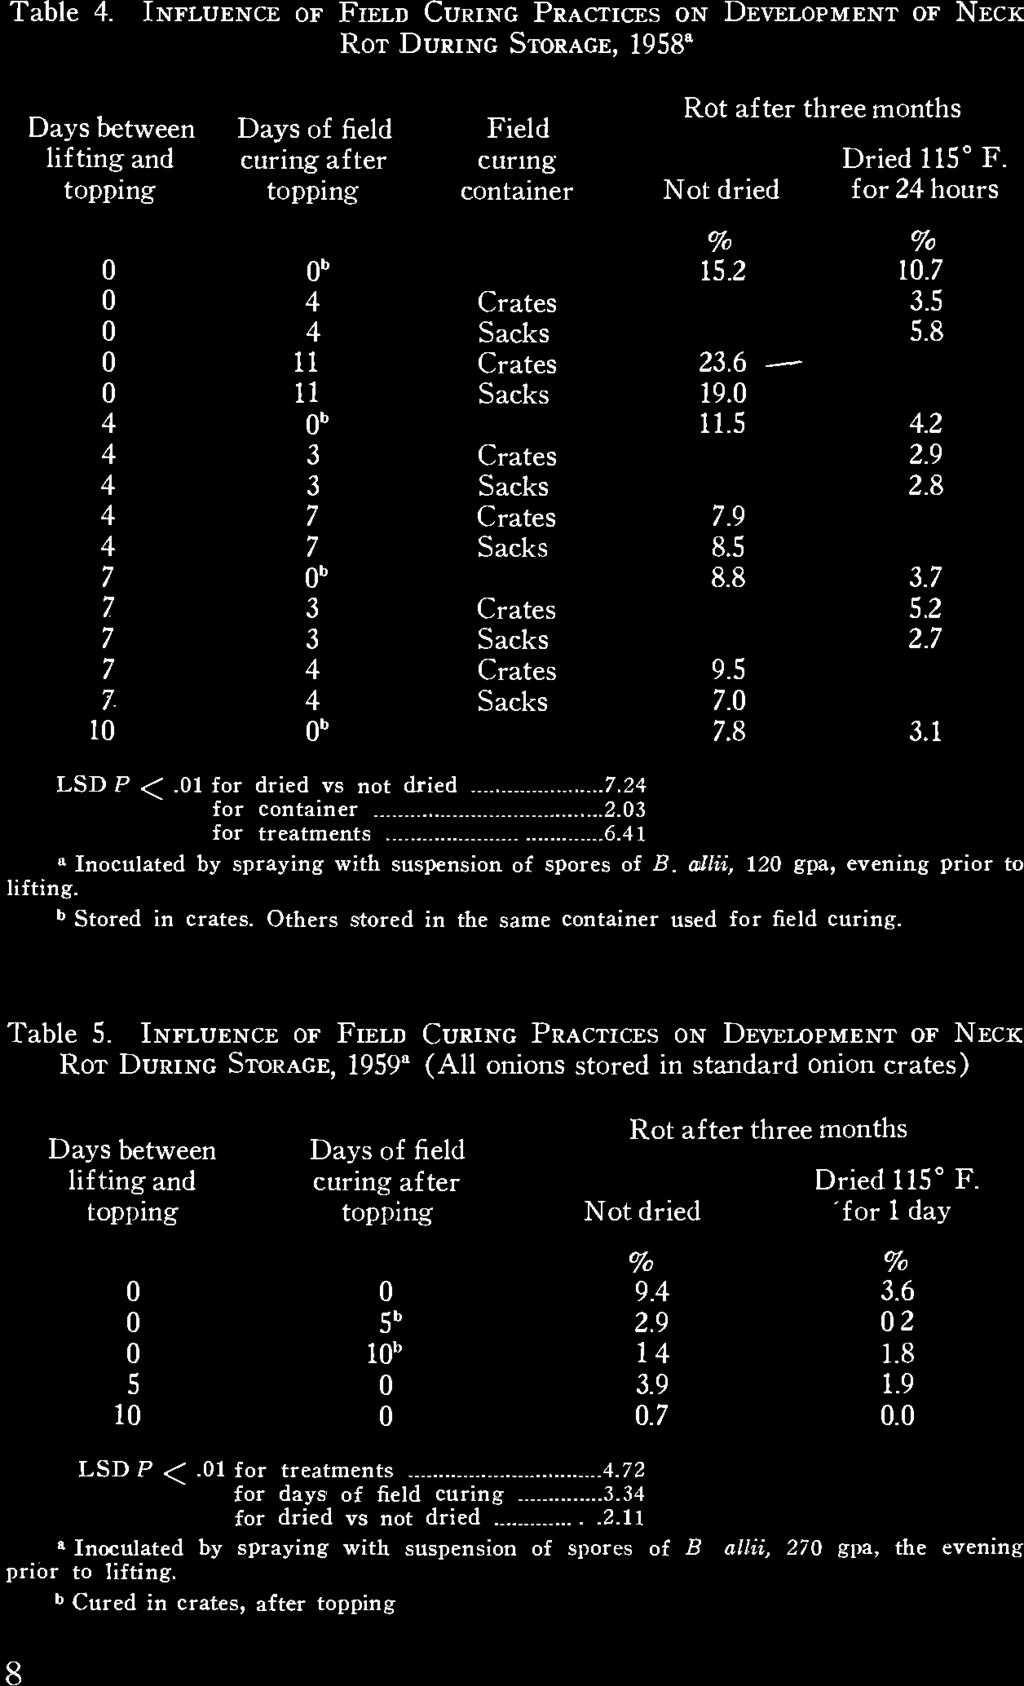 Table 4. INFLUENCE OF FIELD CURING PRACTICES ON DEVELOPMENT OF NECK ROT DURING STORAGE, 1958' Days between Rot after three months Days of field Field lifting and curing after curing Dried 115 F.